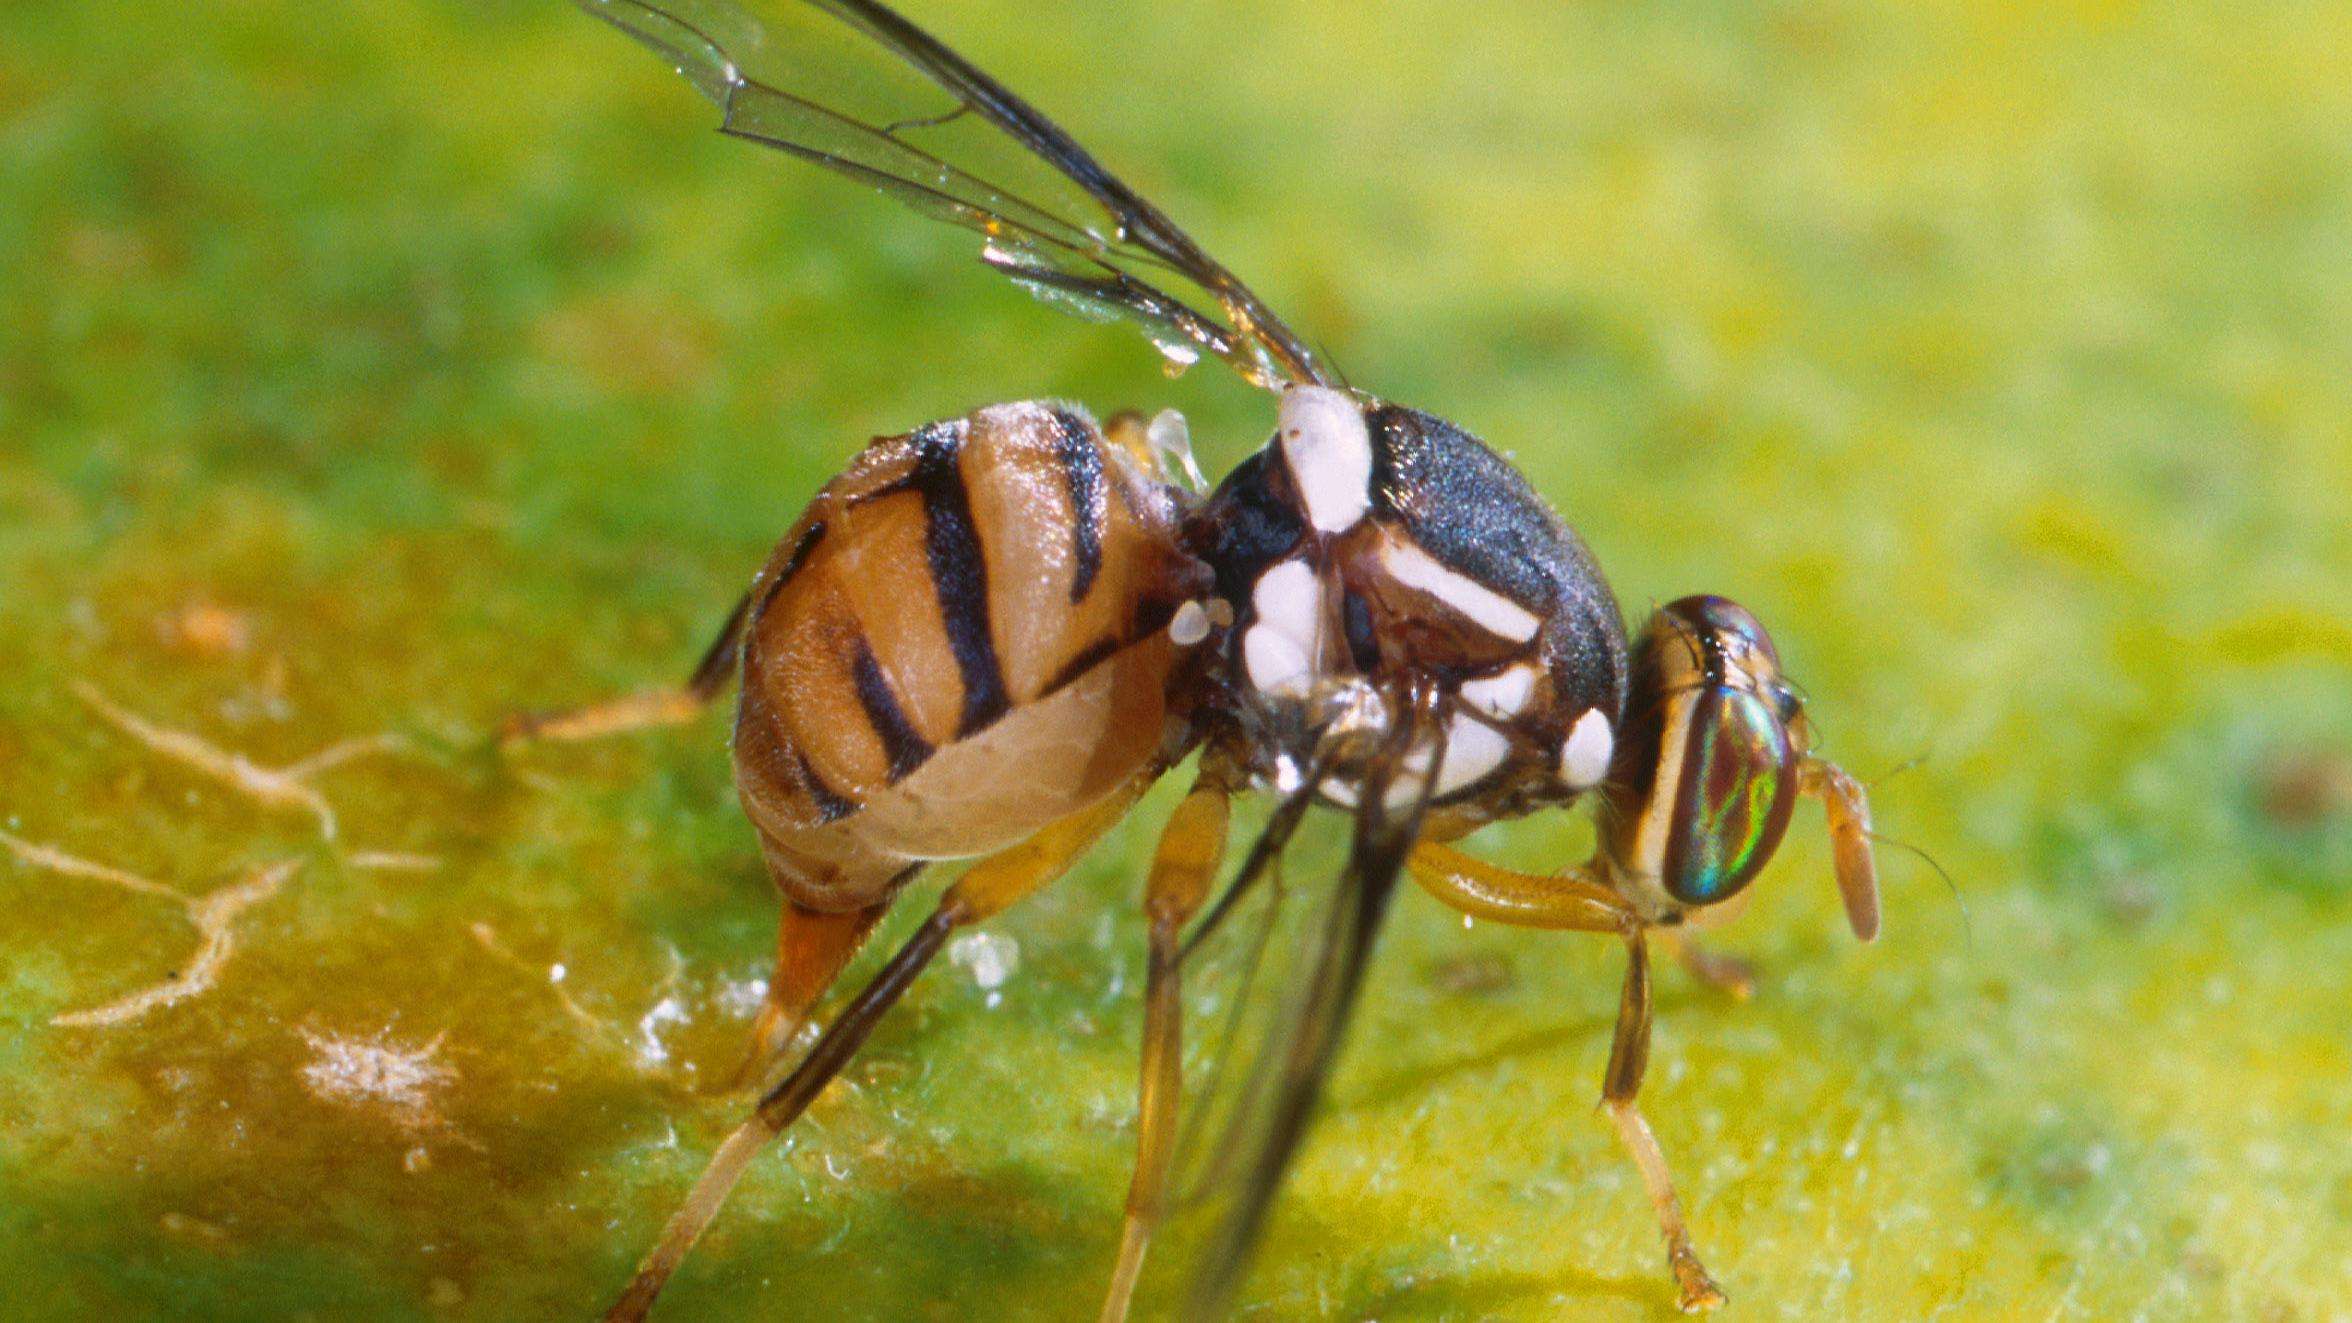 Fruit fly with white spots on a dark-brown thorax and a tan abdomen with dark-brown to black markings.